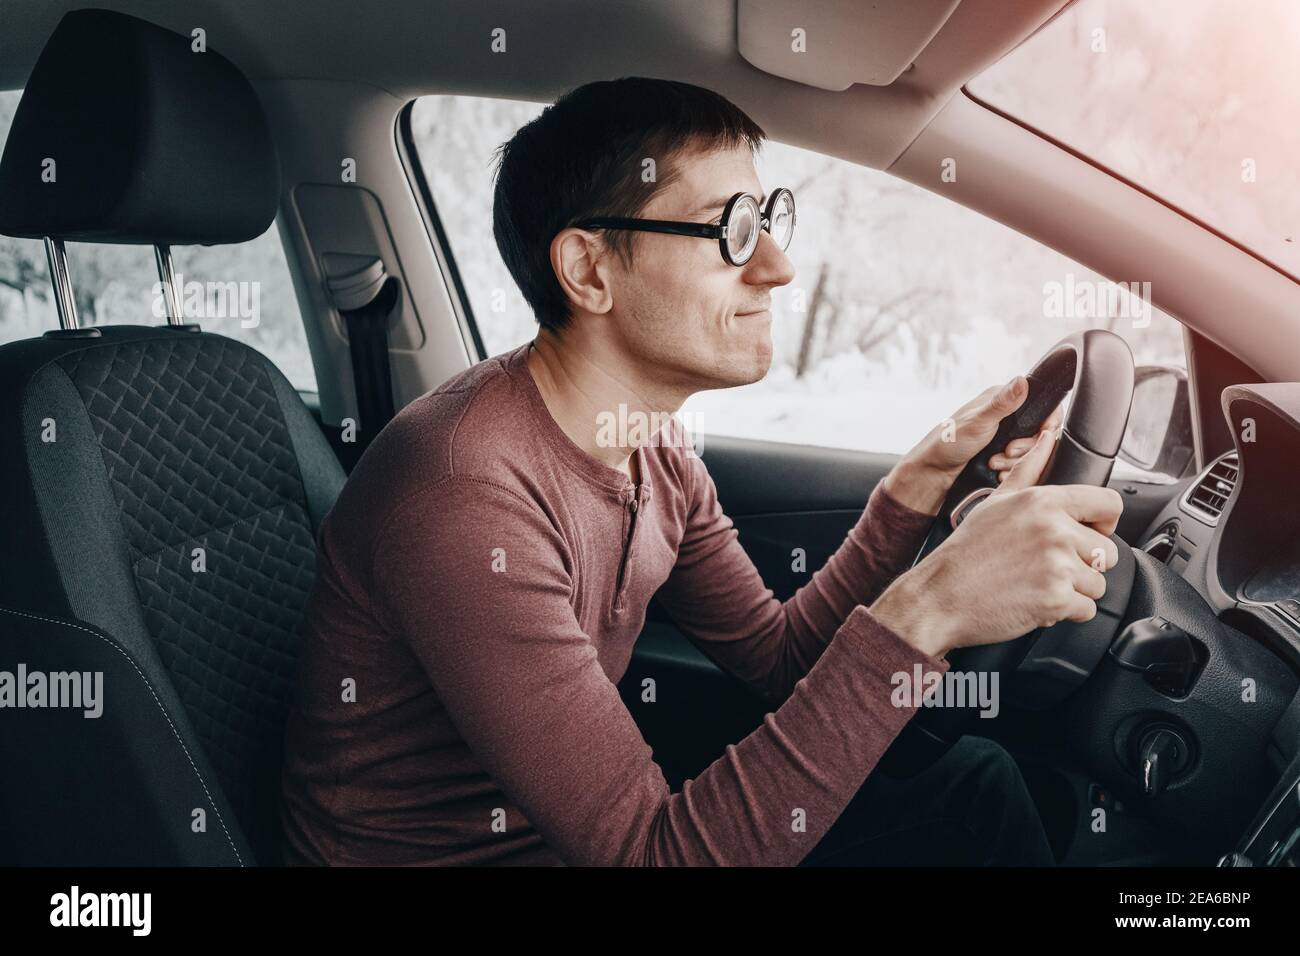 The ridiculous and idiotic nerd driver is staring at the road and holding the steering wheel. Concept of a novice driver and learning to drive in the Stock Photo